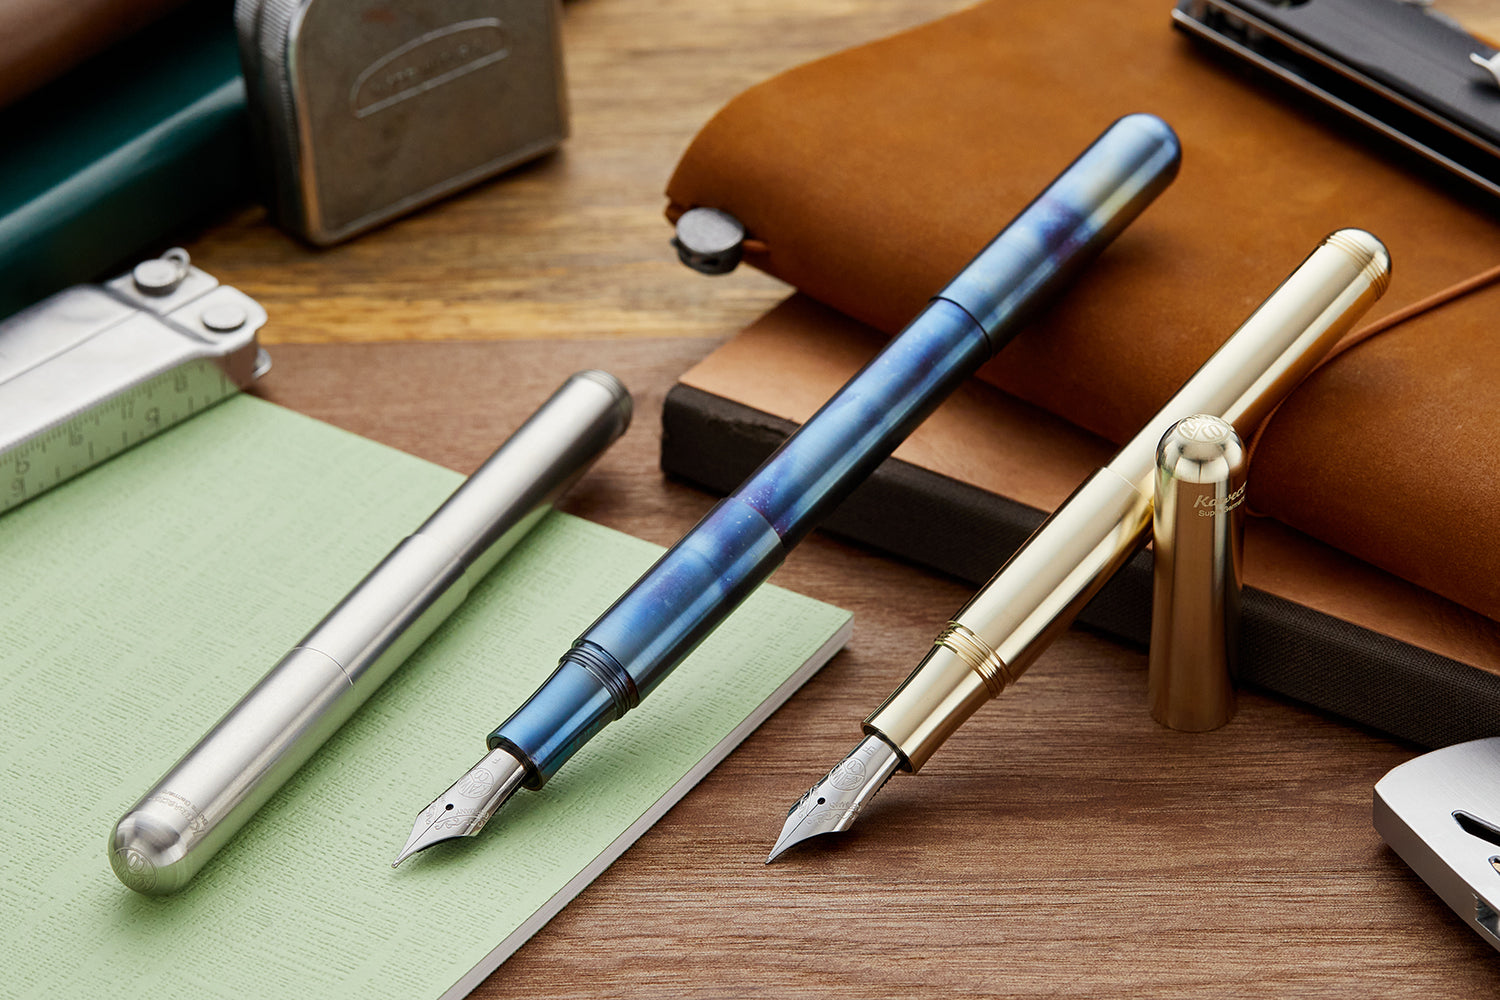 Kaweco Supra fountain pens in brass, steel and flame blue. Capped and uncapped on wooden desk